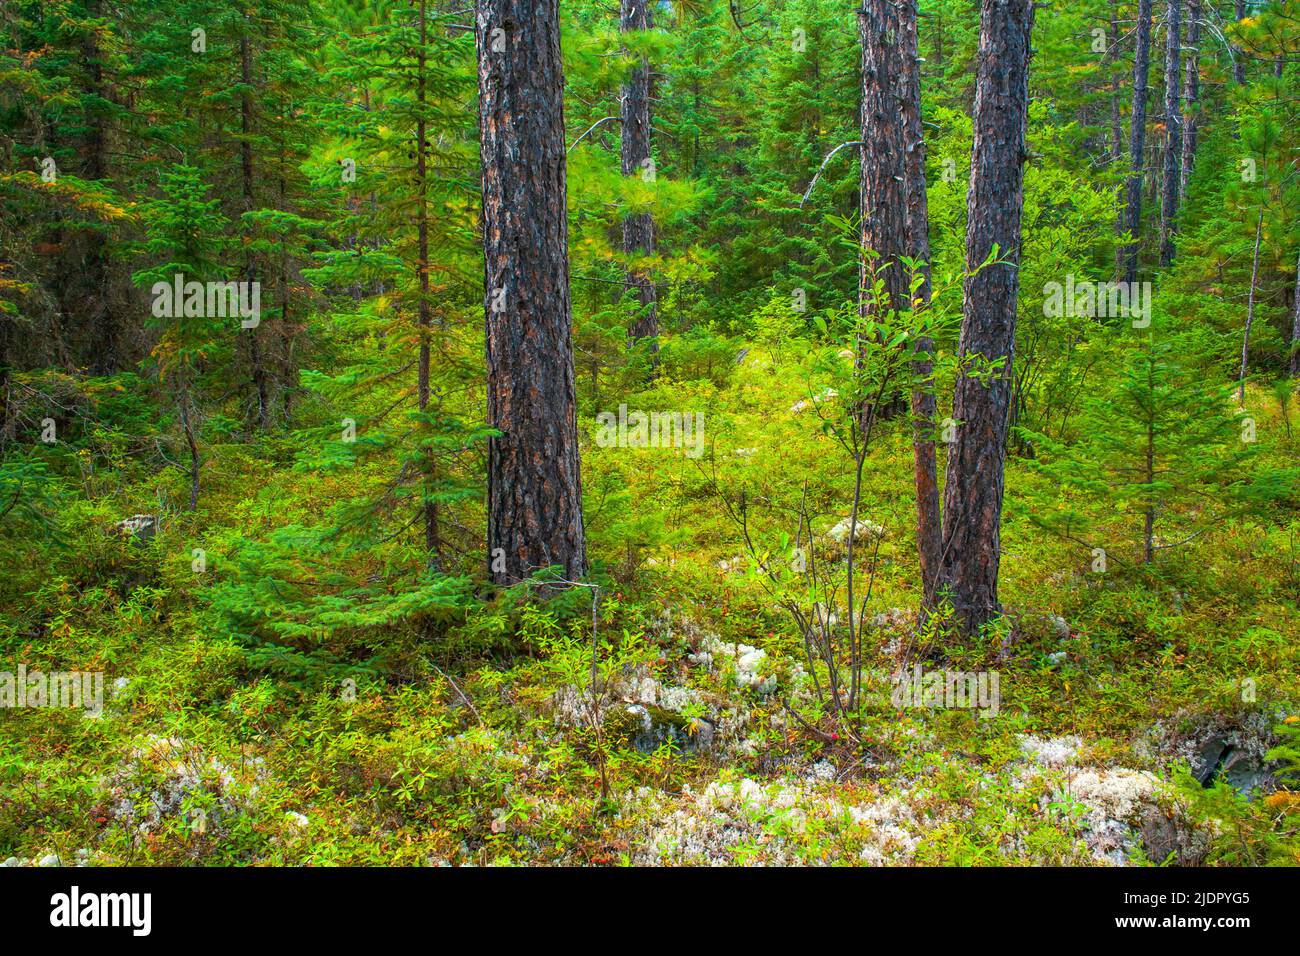 A boreal forest with Red Pine in  Parc National des Hautes-Gorges-de-la-Riviere-Malbaie, , Quebec, Canadsa Stock Photo